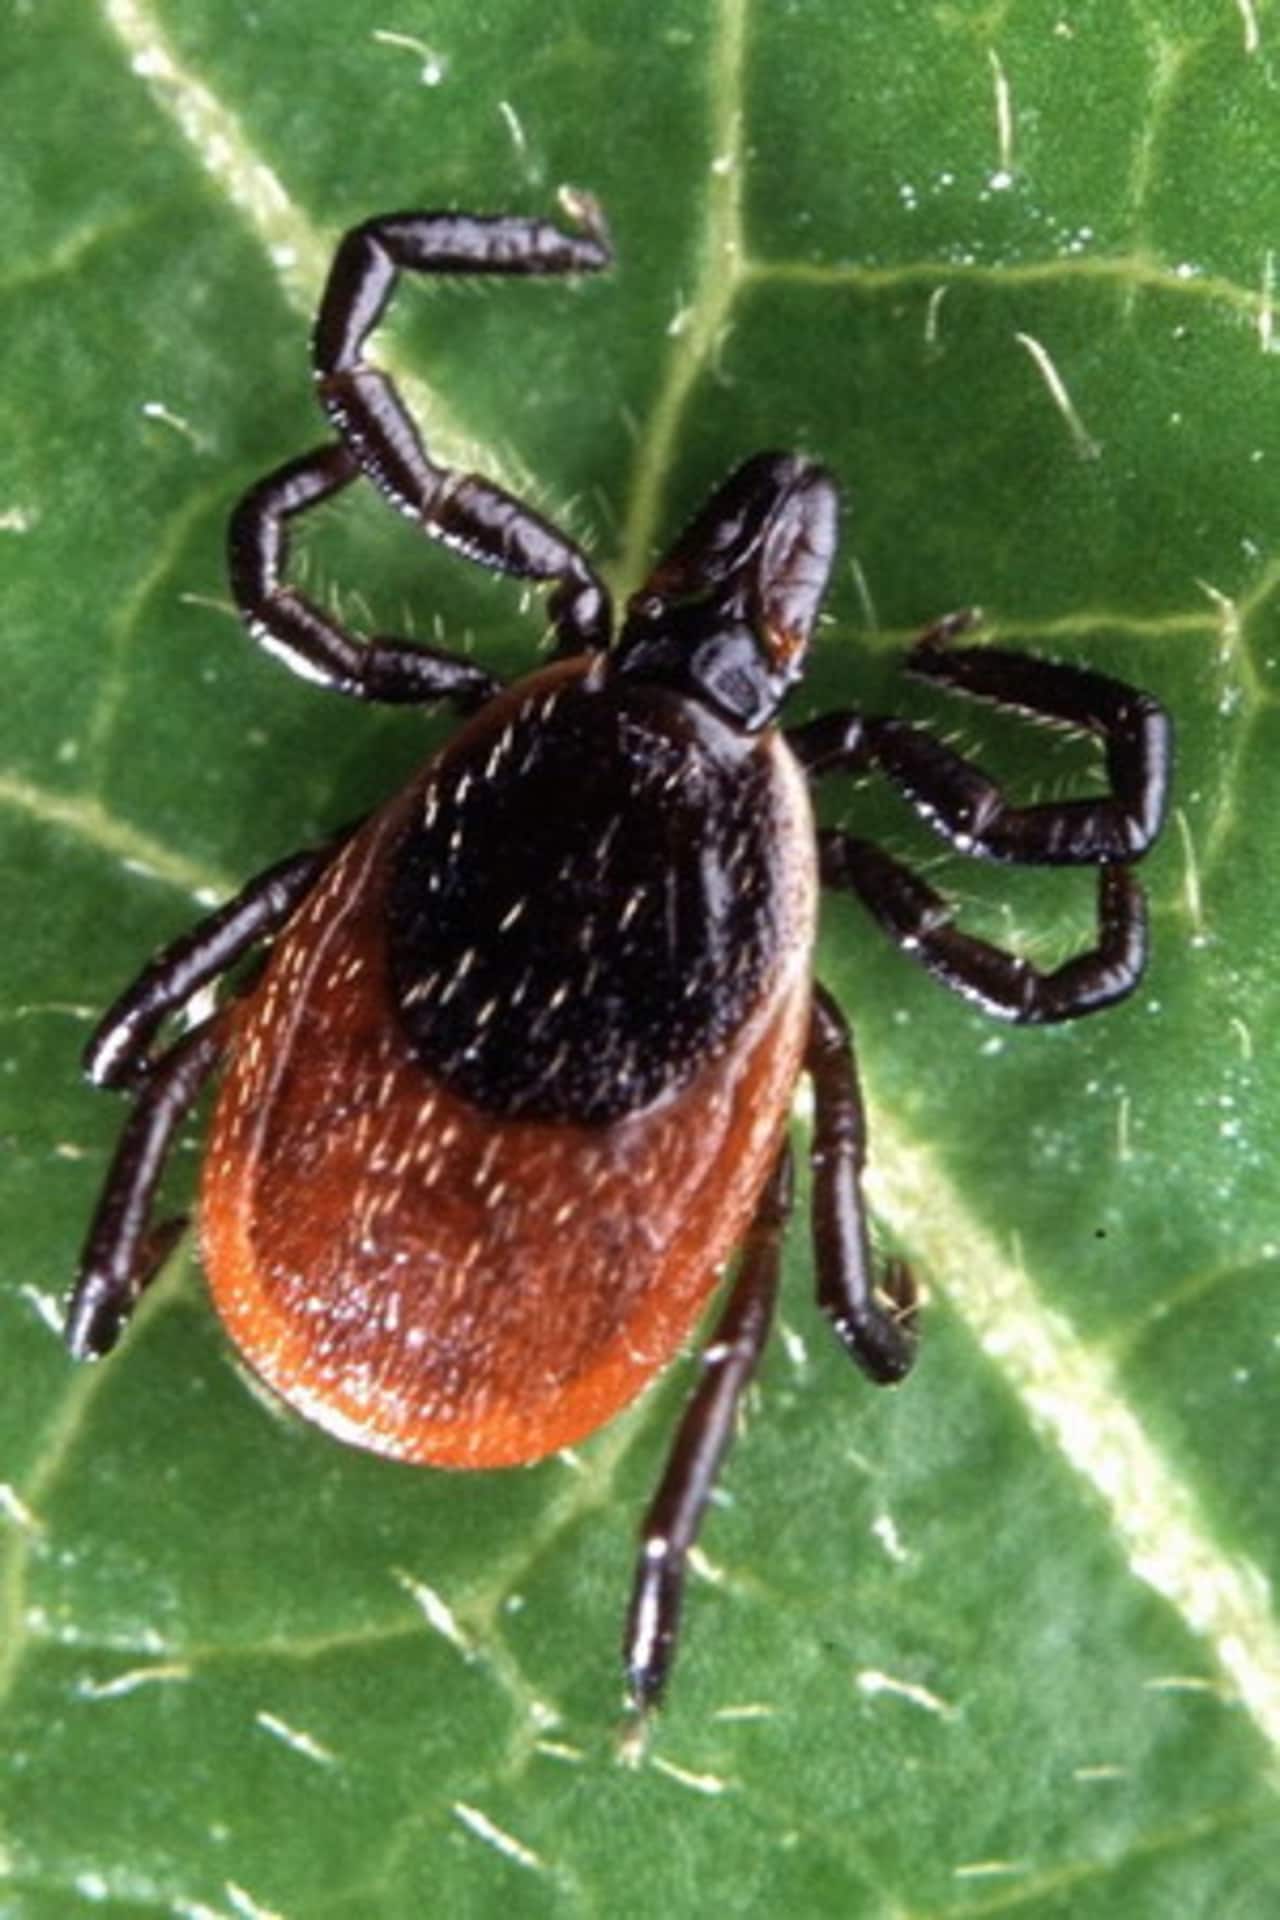 Powassan, known as "POW," is a life-threatening virus carried and spread by three types of ticks, including the deer tick that transmits Lyme disease.